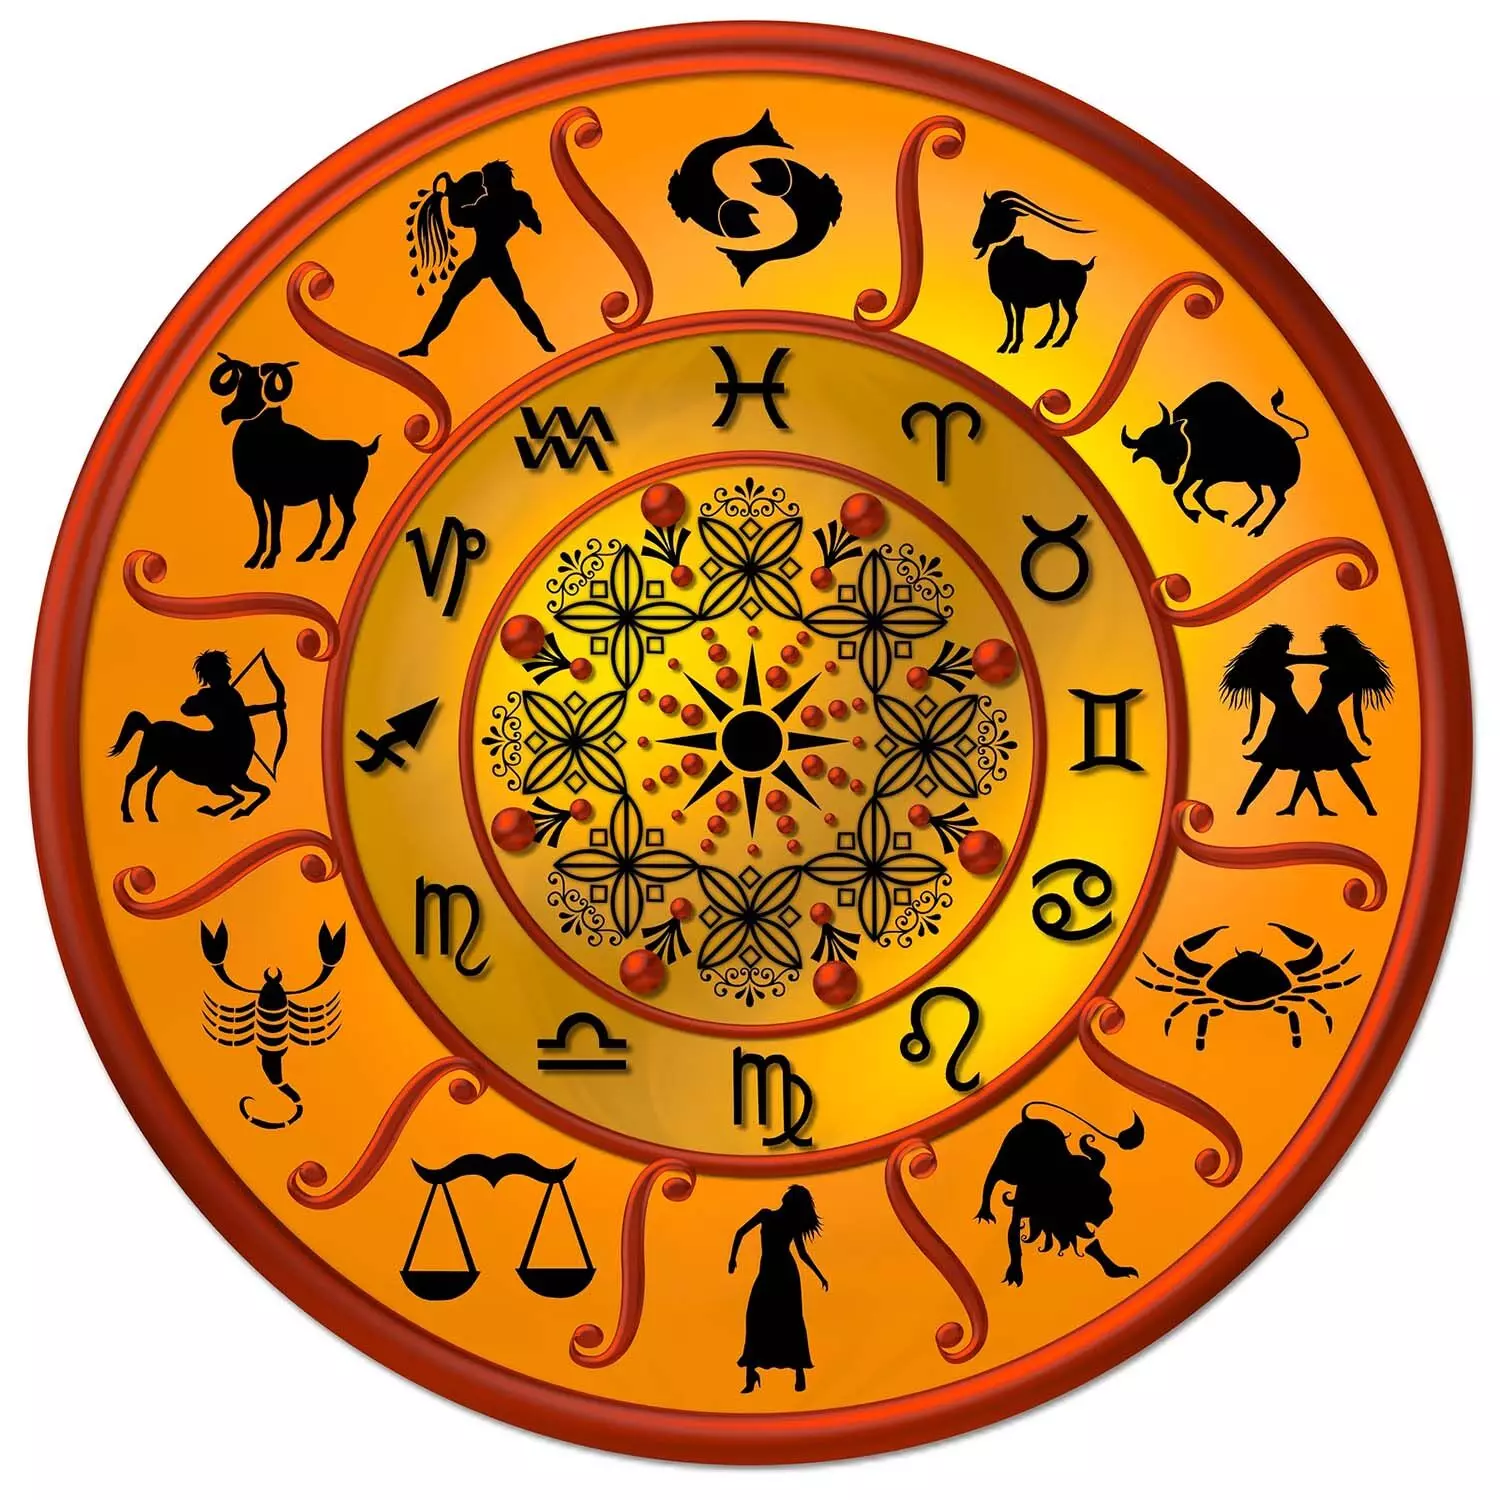 27 July – Know your todays horoscope